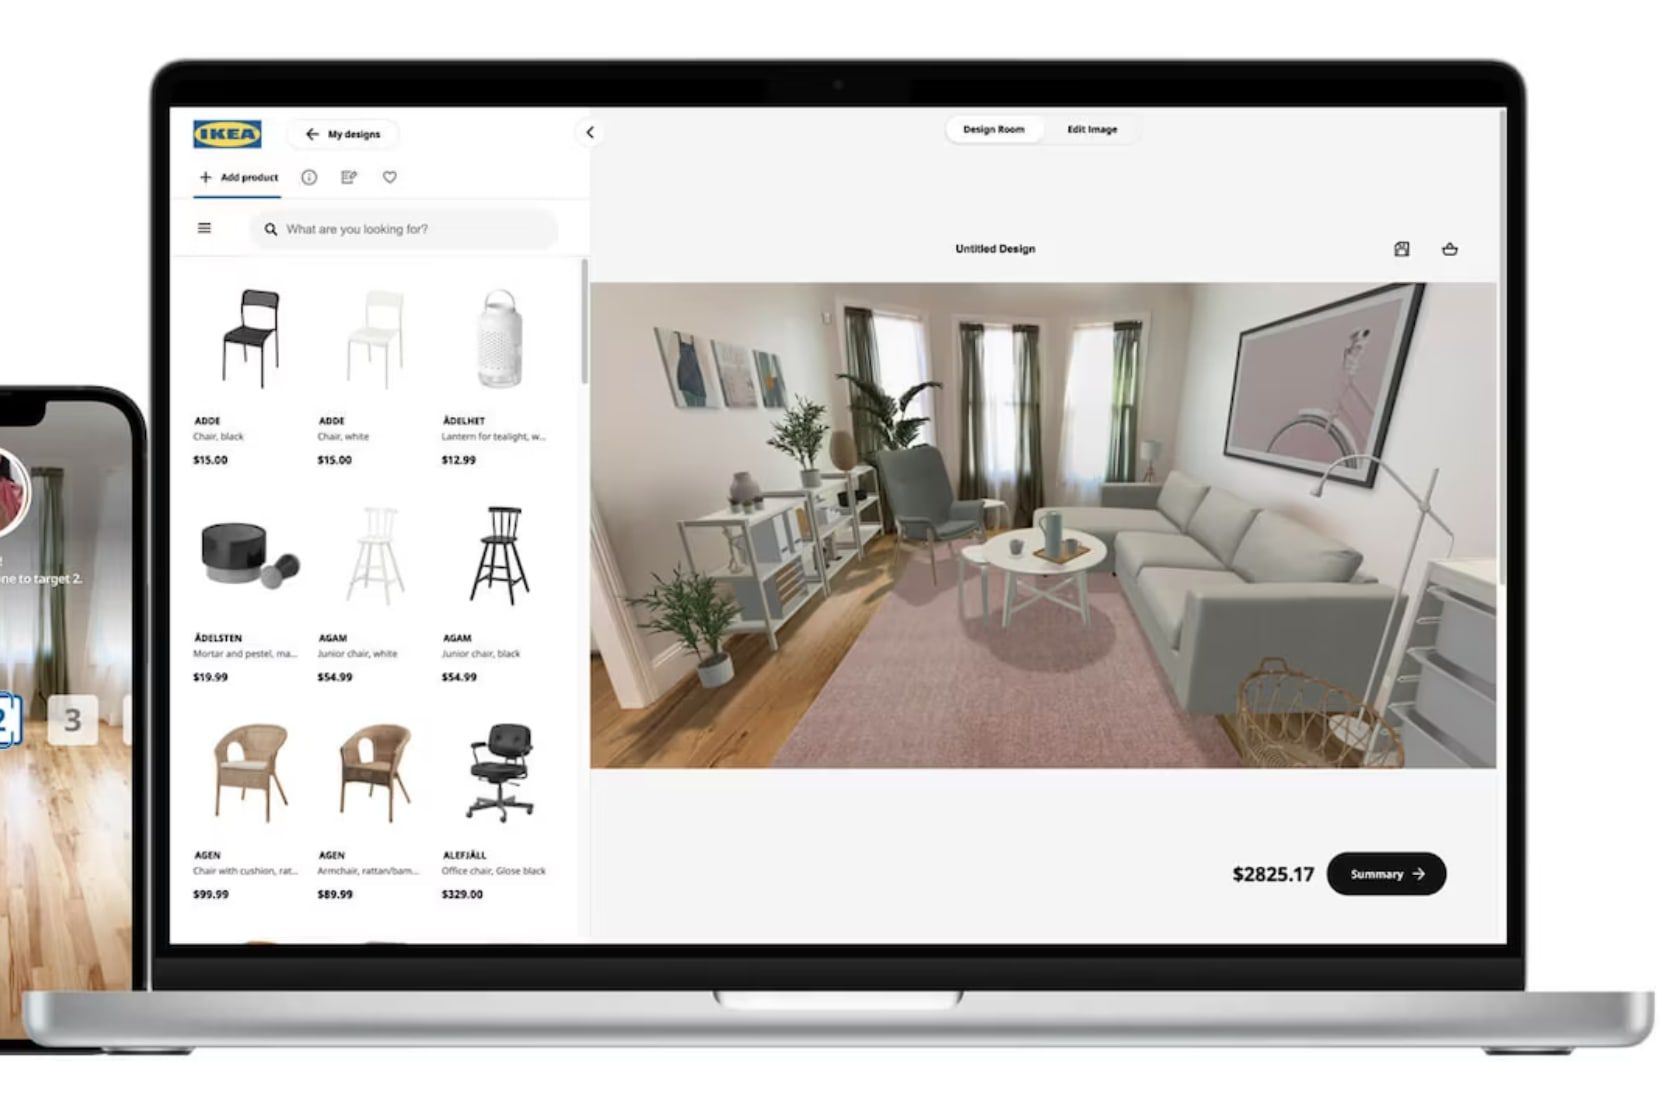 Build your room with Ikea furniture virtually.